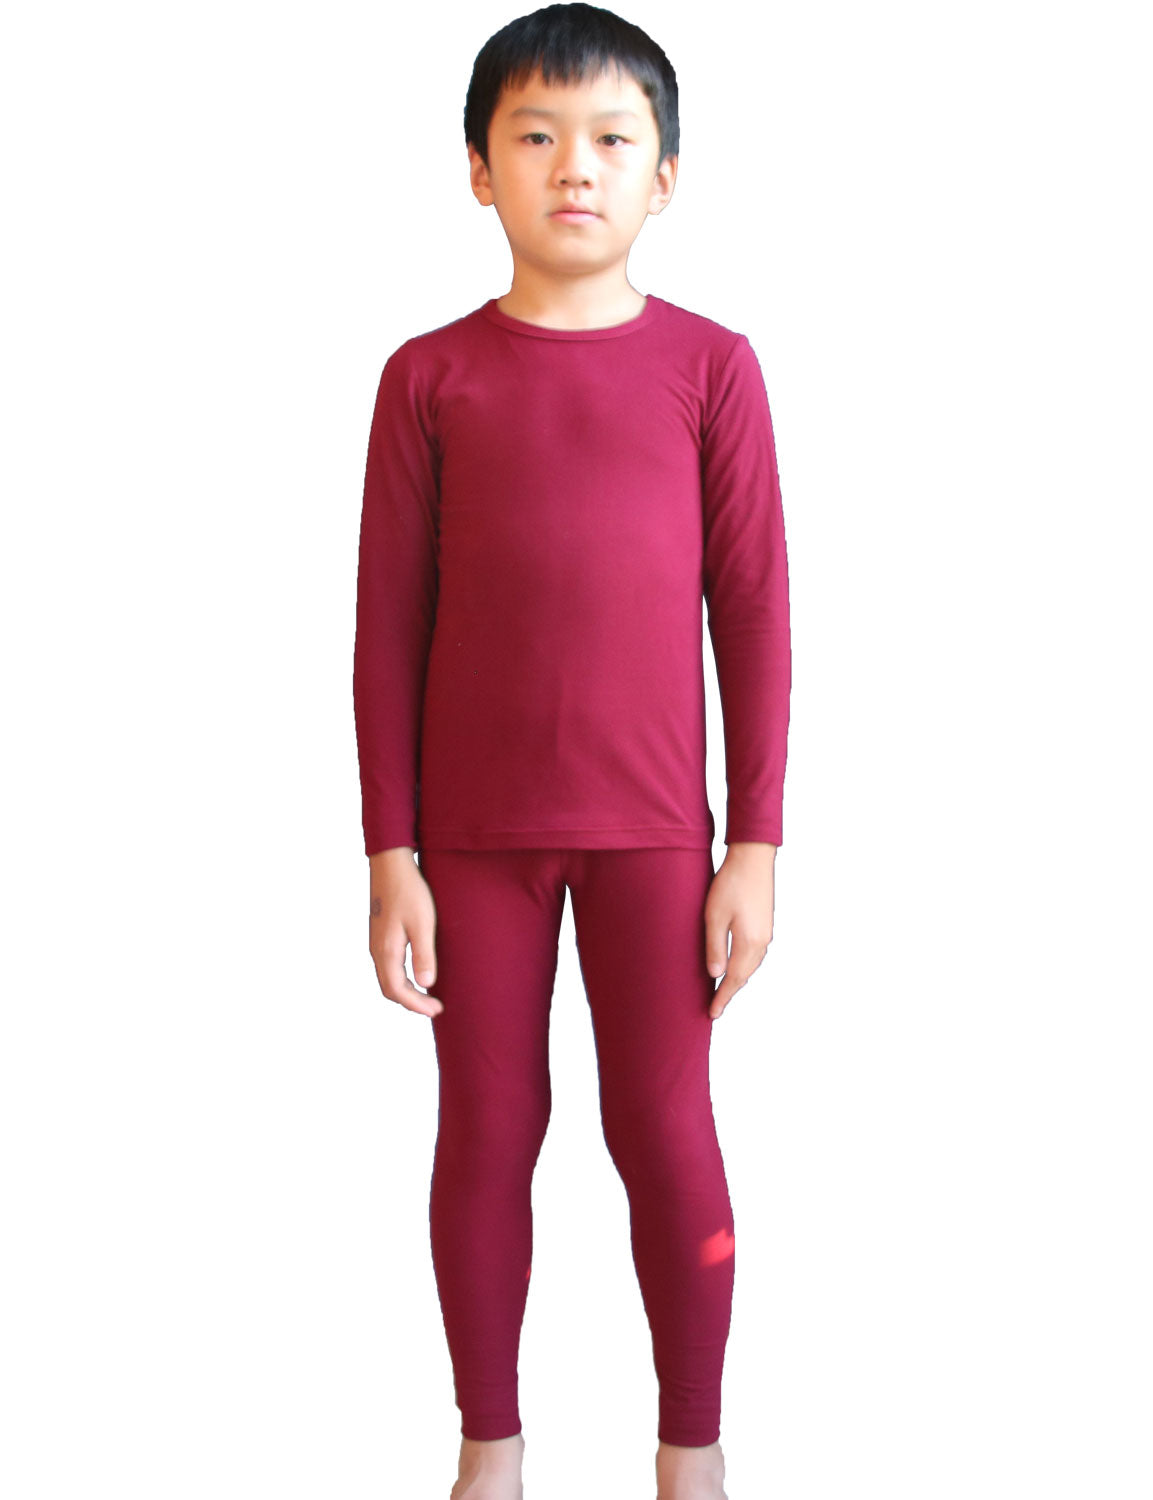 Rocky Kids Thermal Underwear Top & Bottom Set Long Johns for Boys, Red XS